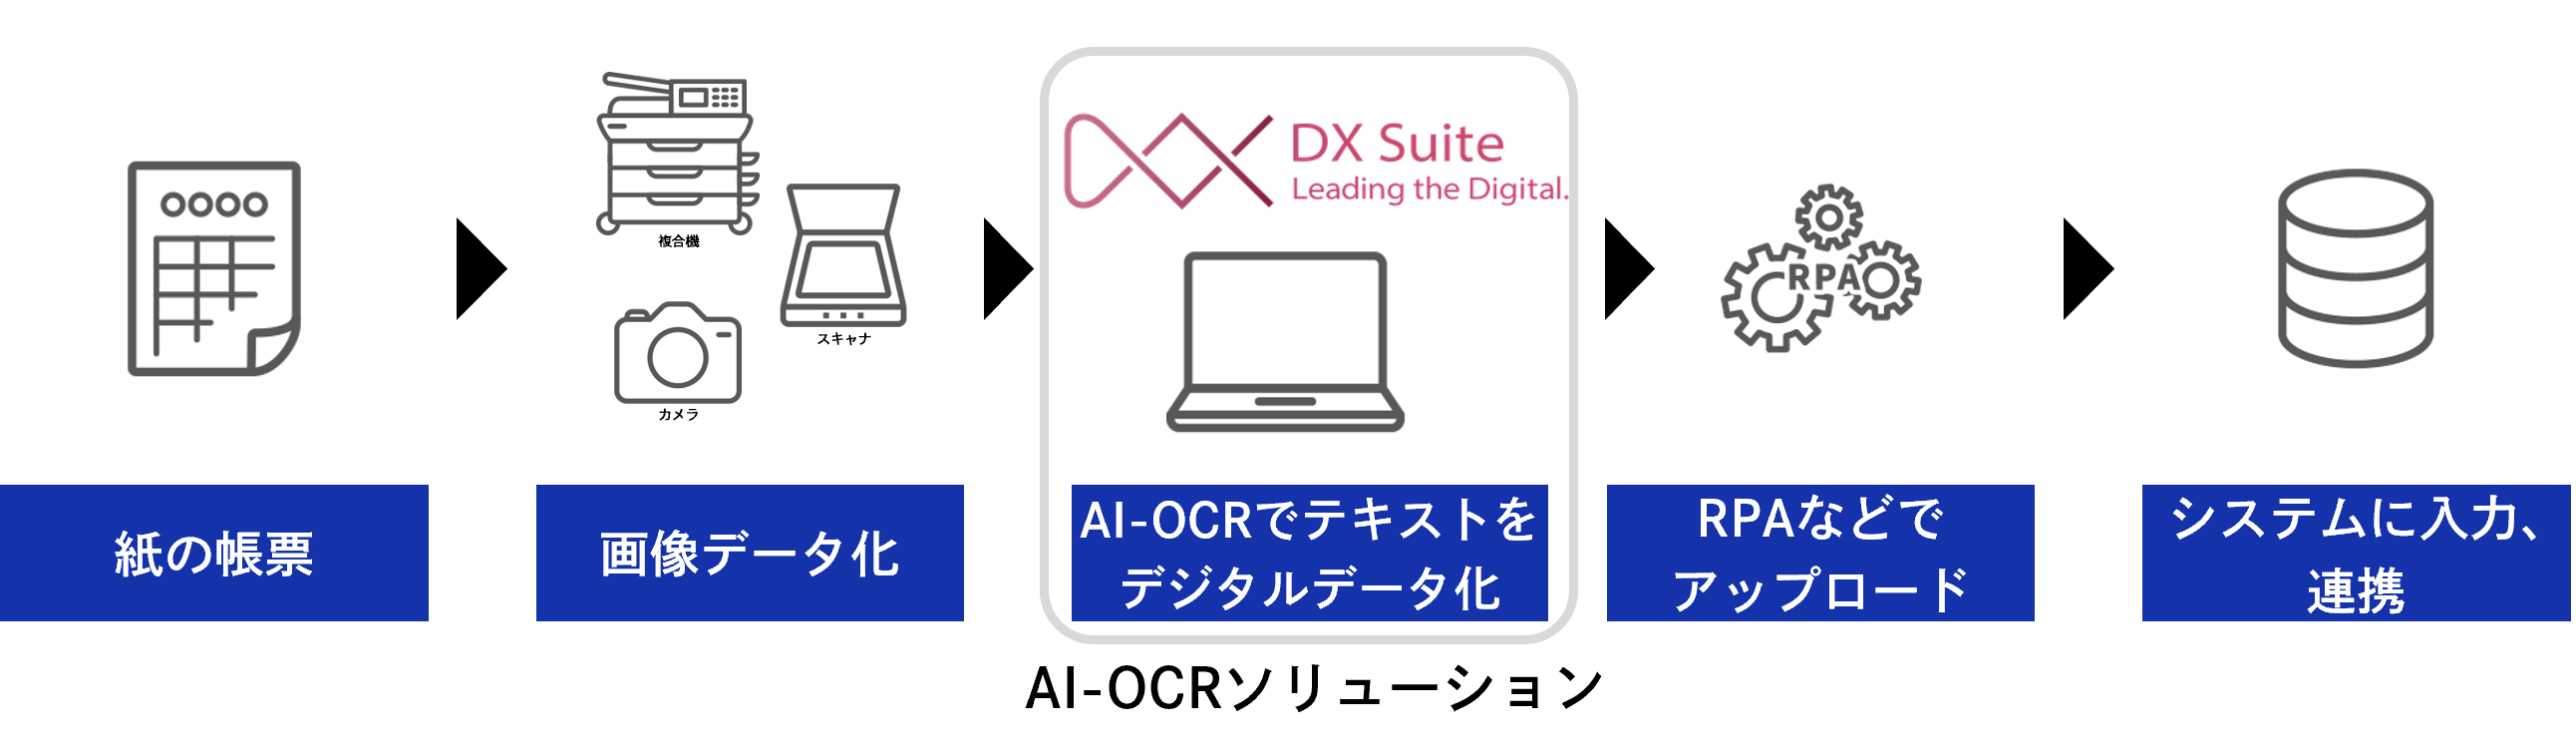 「DX Suite」を活用した業務フロー